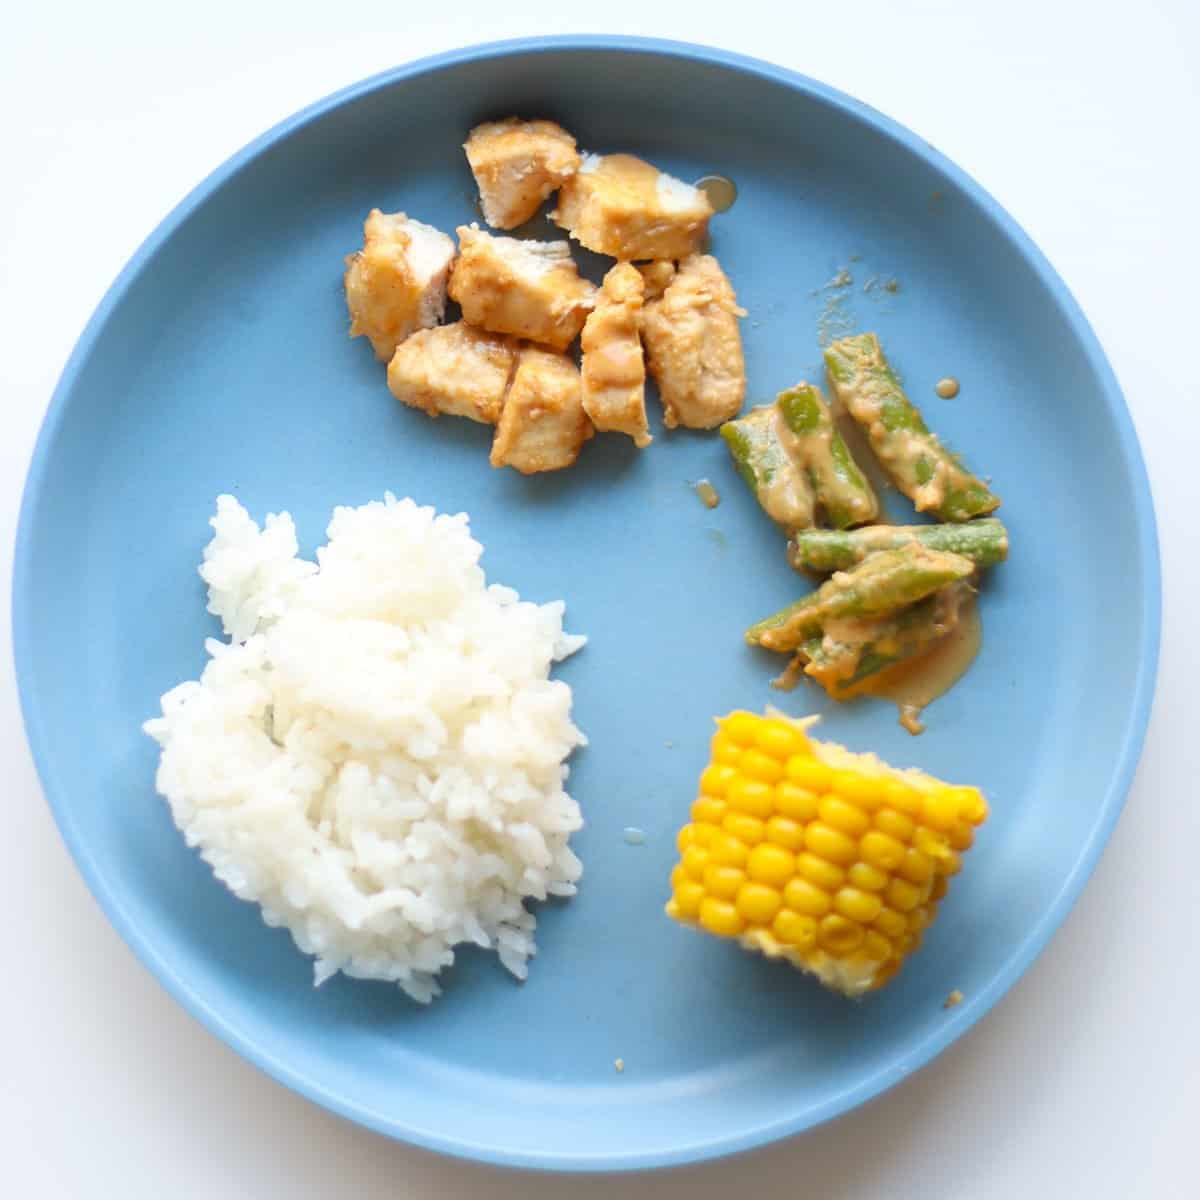 A toddler's plate with portions of chicken, green beans, corn on the cob and rice separated out.